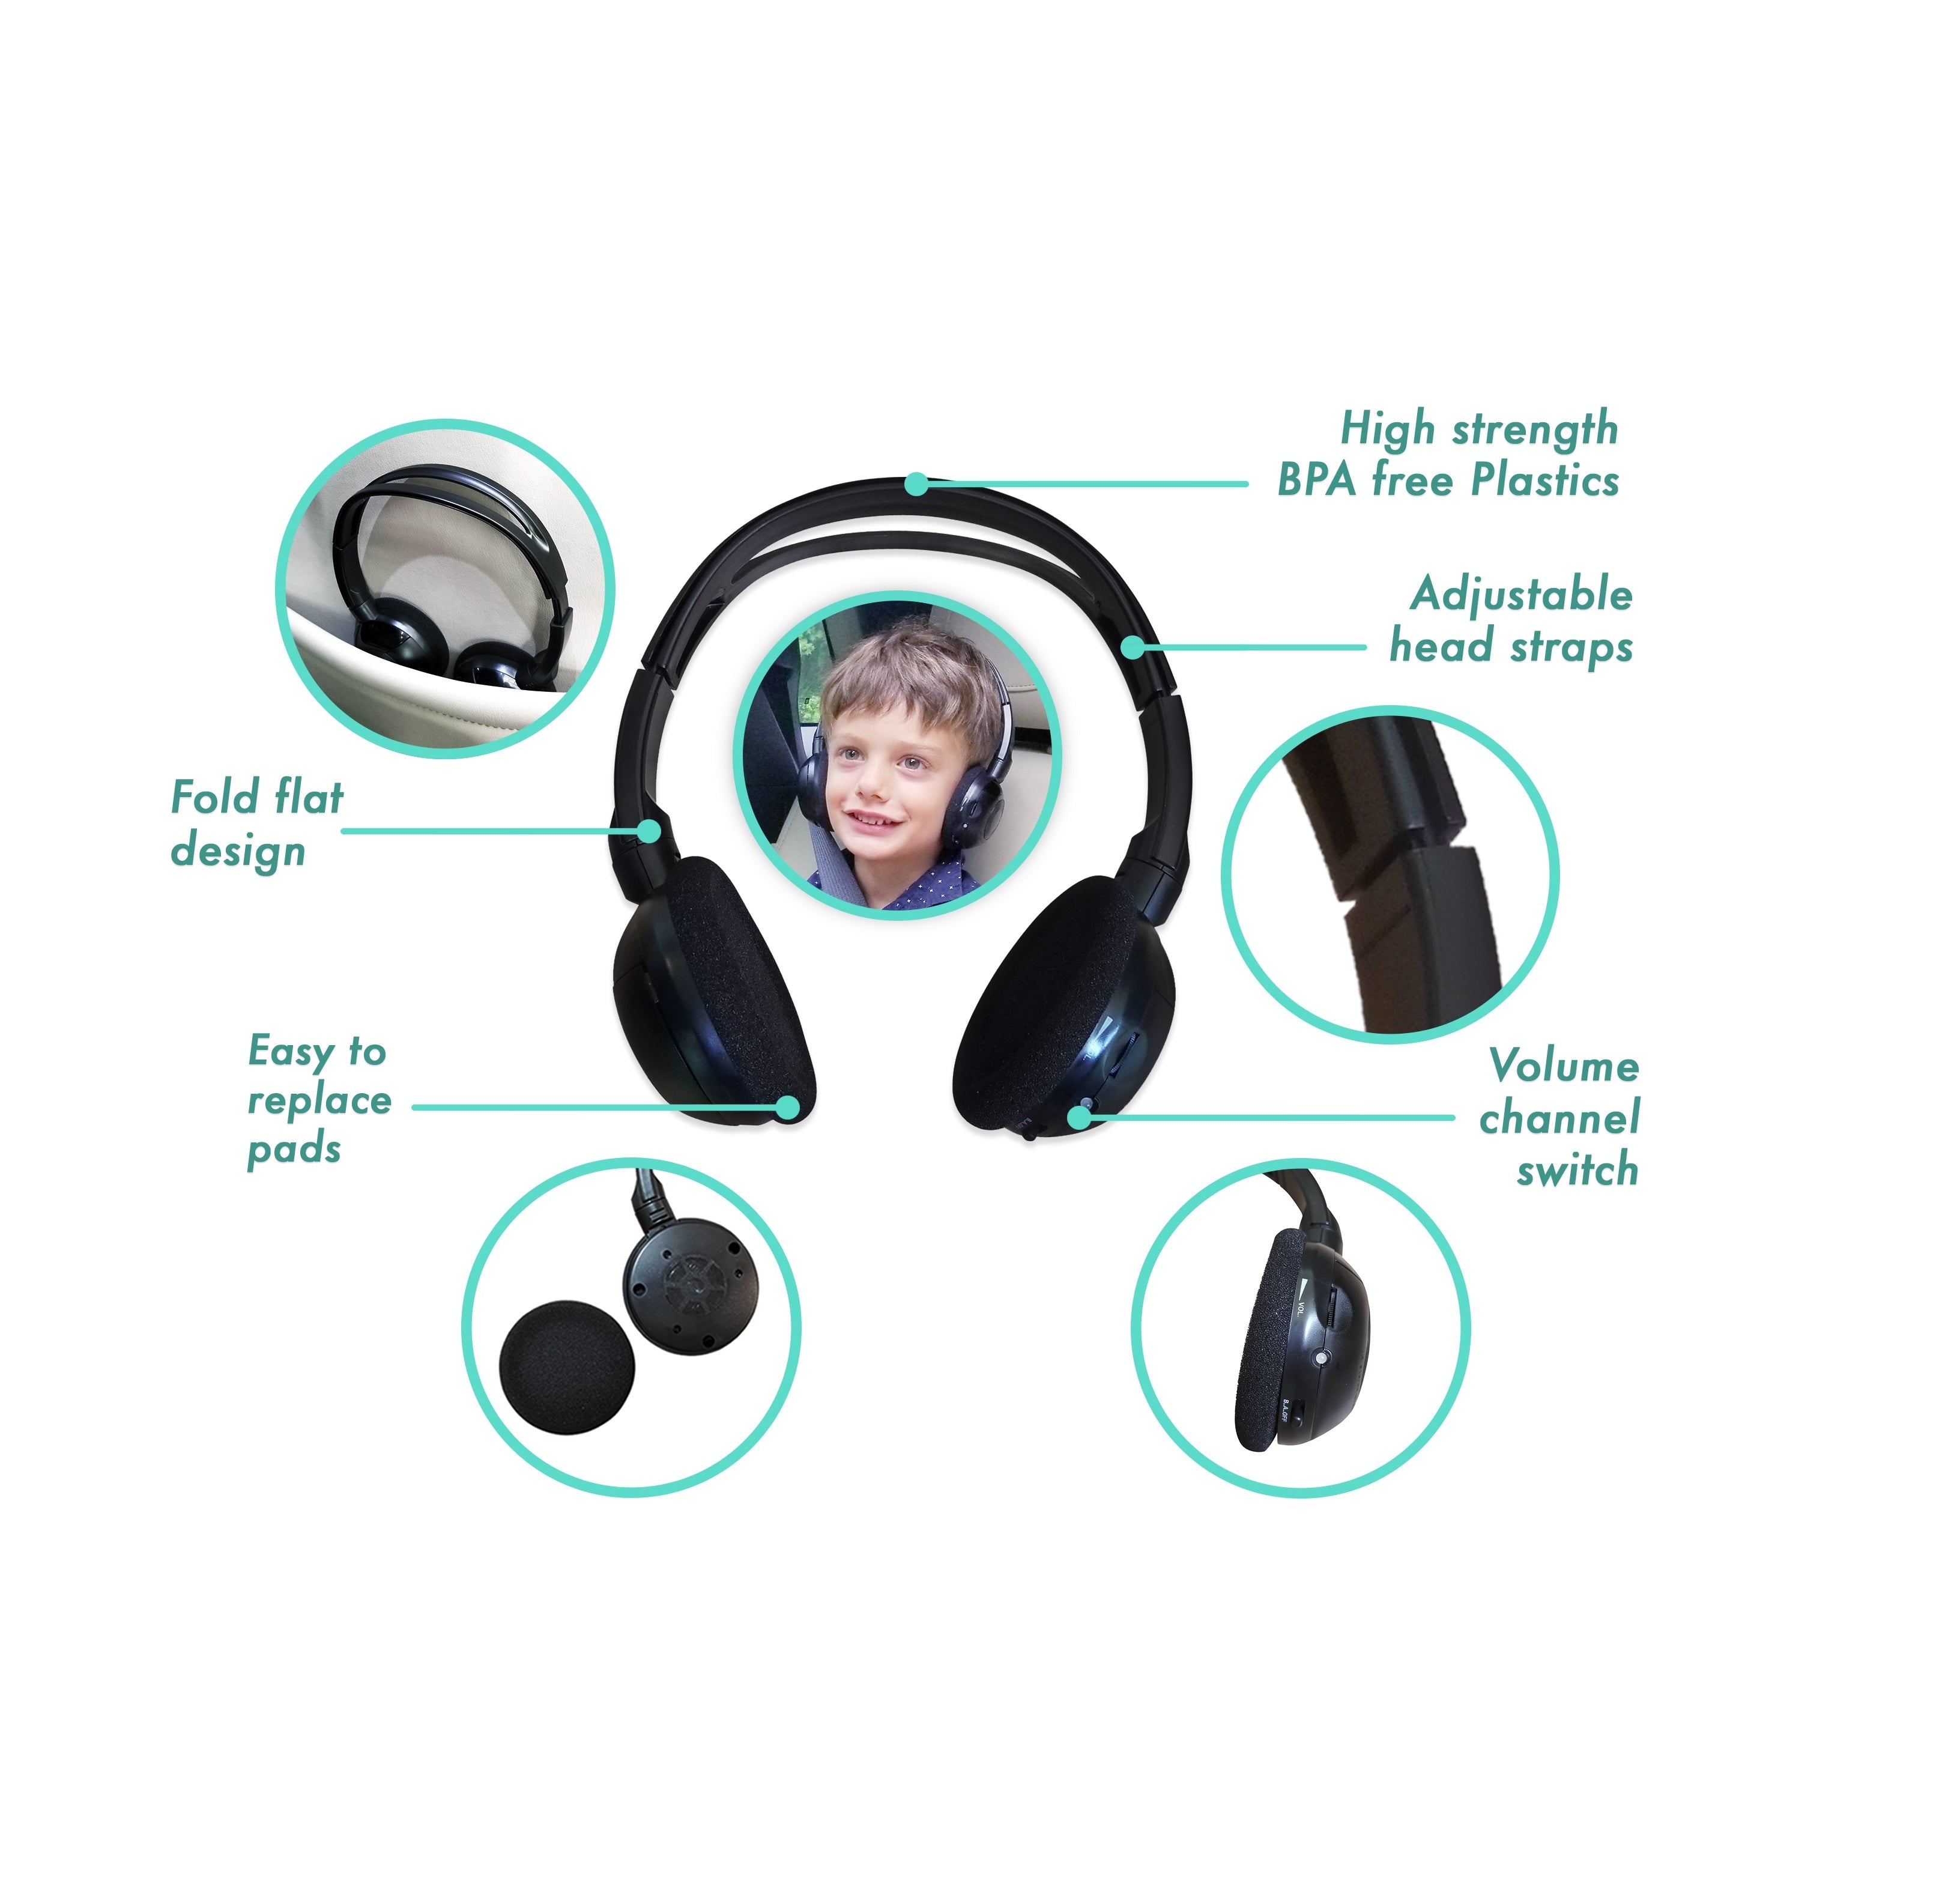 2013 Chrysler Town and Country Compatible Wireless DVD Headphones and Uconnect Remote